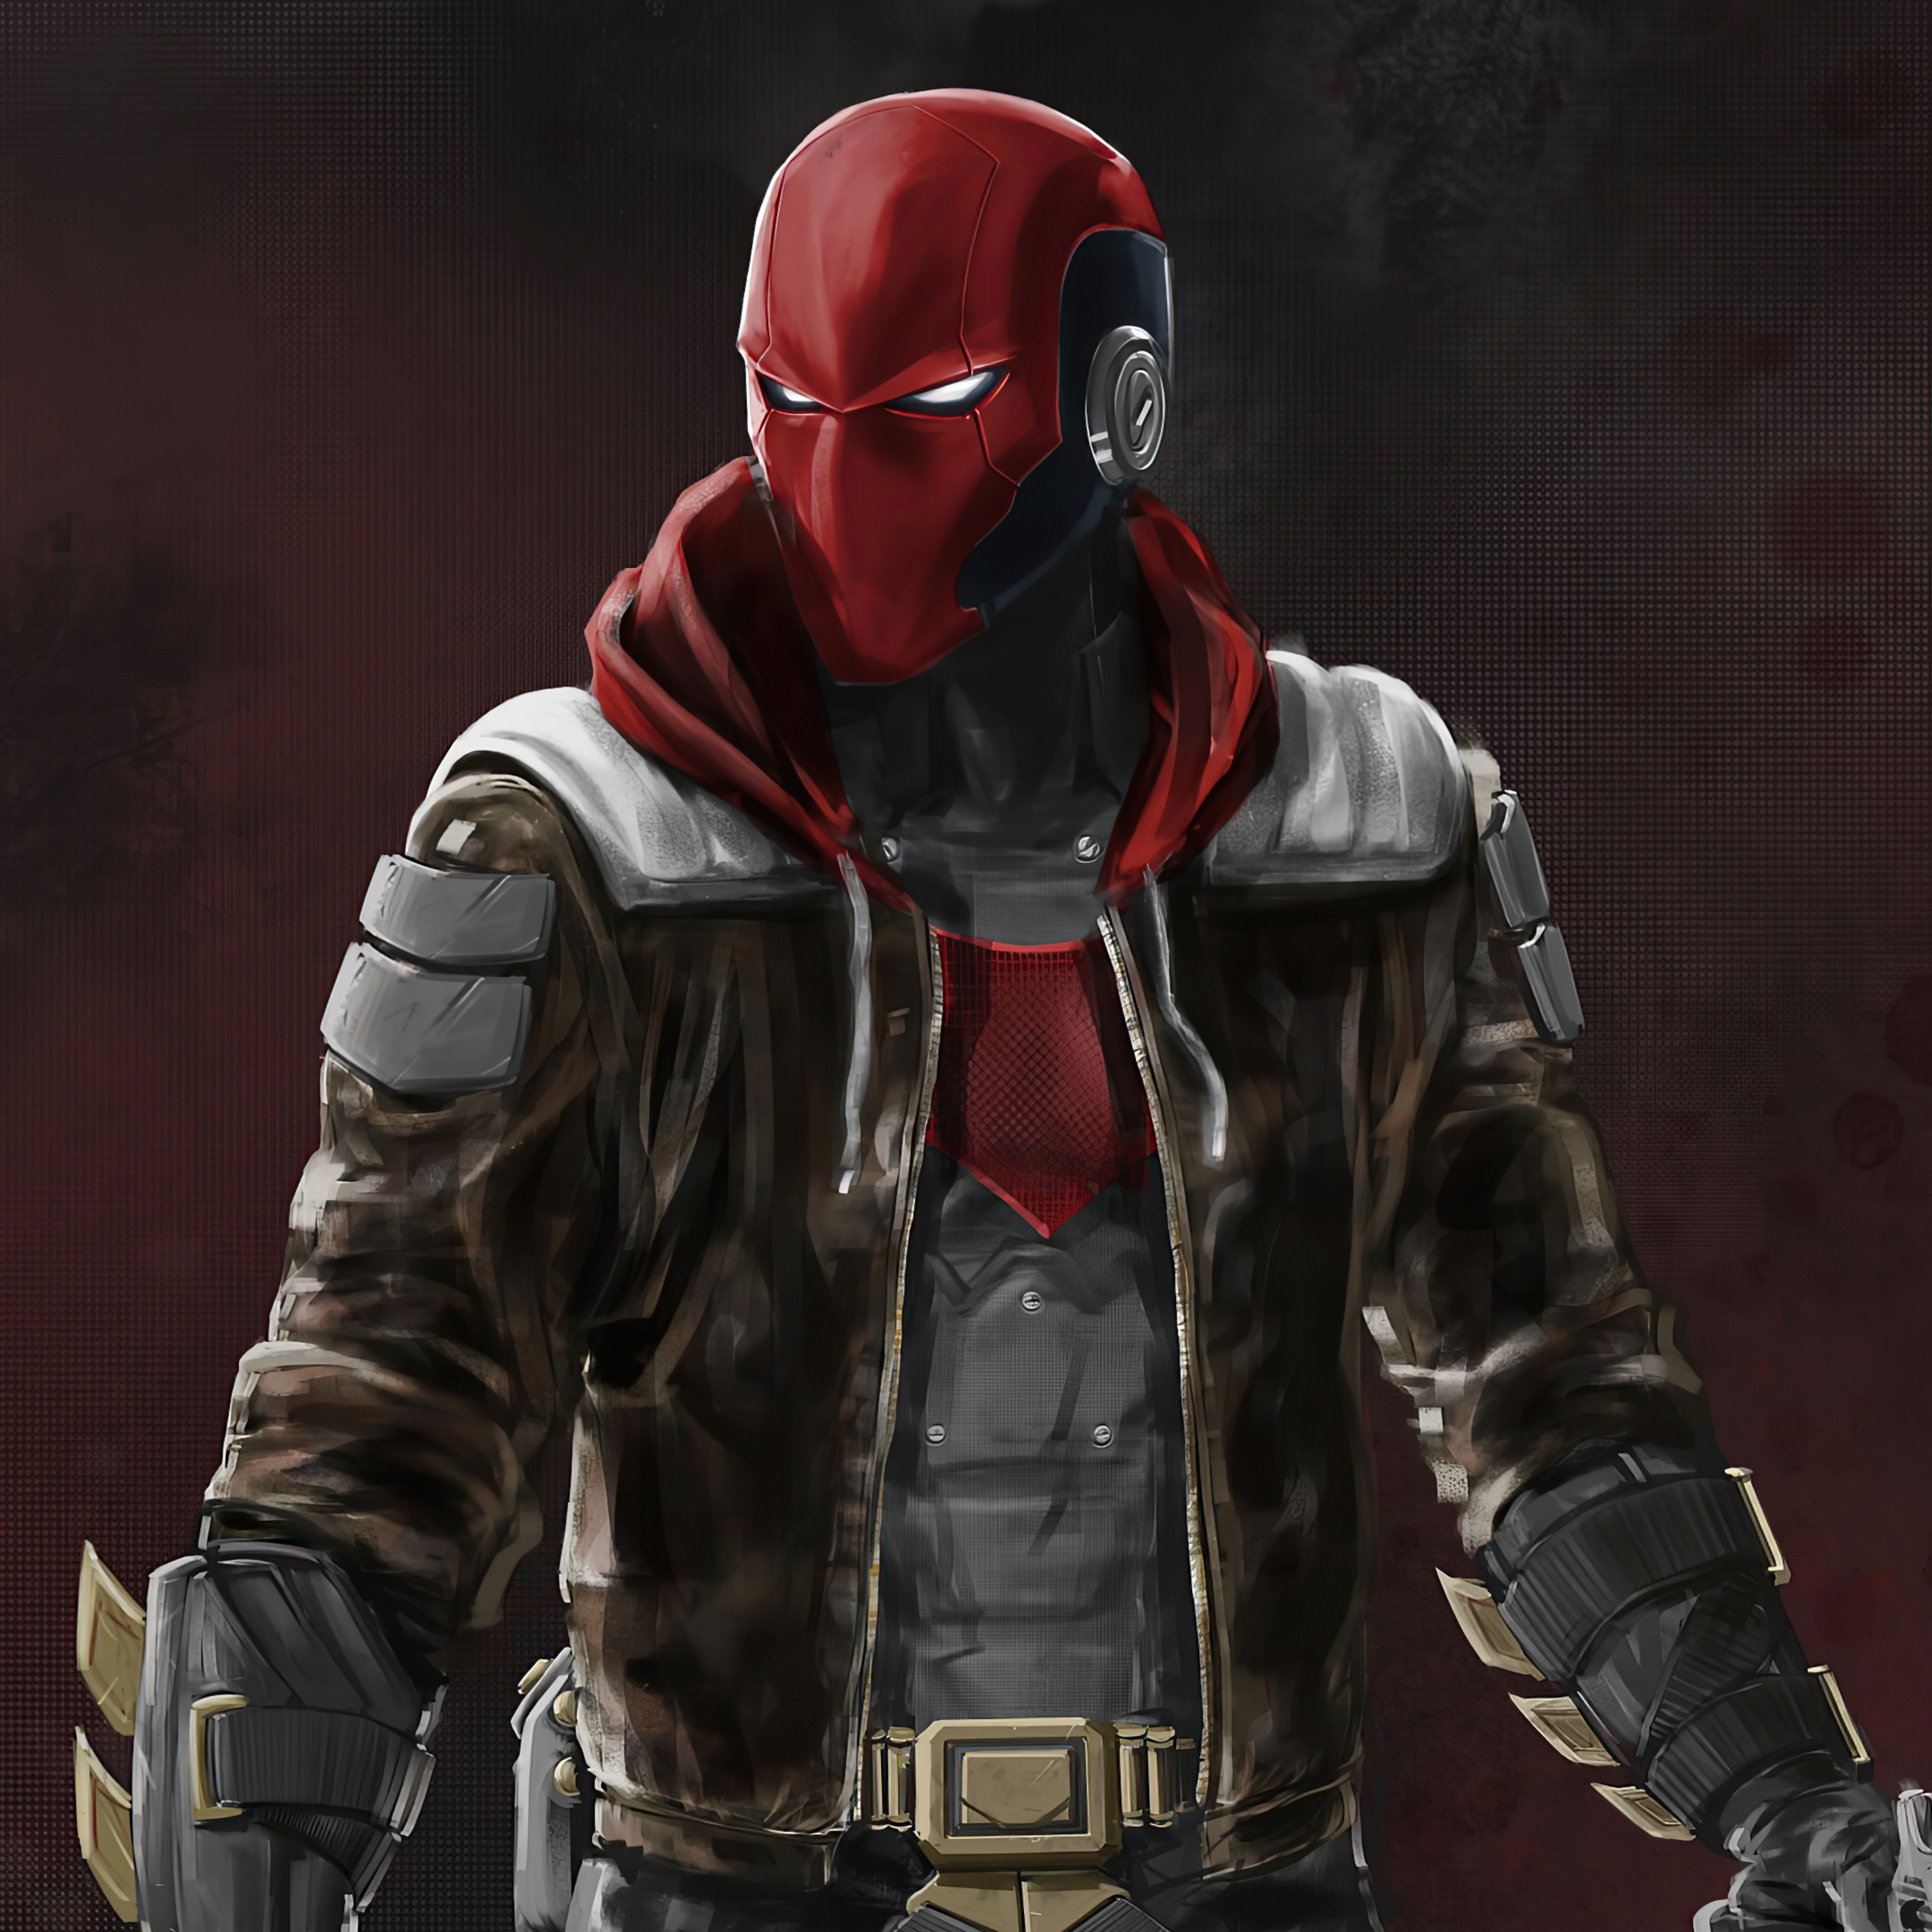 Free #redhood Full HD Wallpaper images.